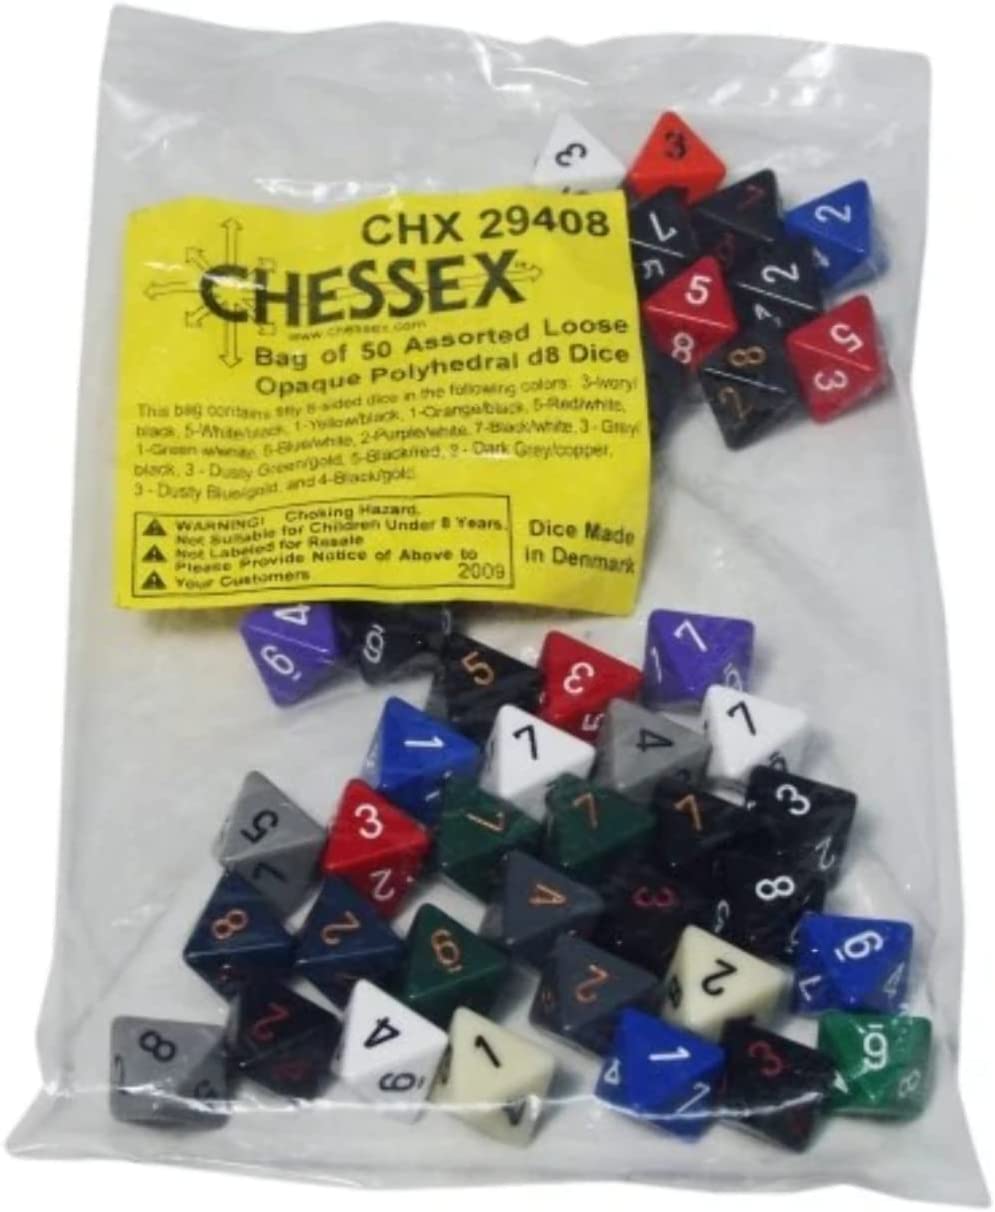 Bag of 50 Assorted Polyhedral Opaque D8 Dice